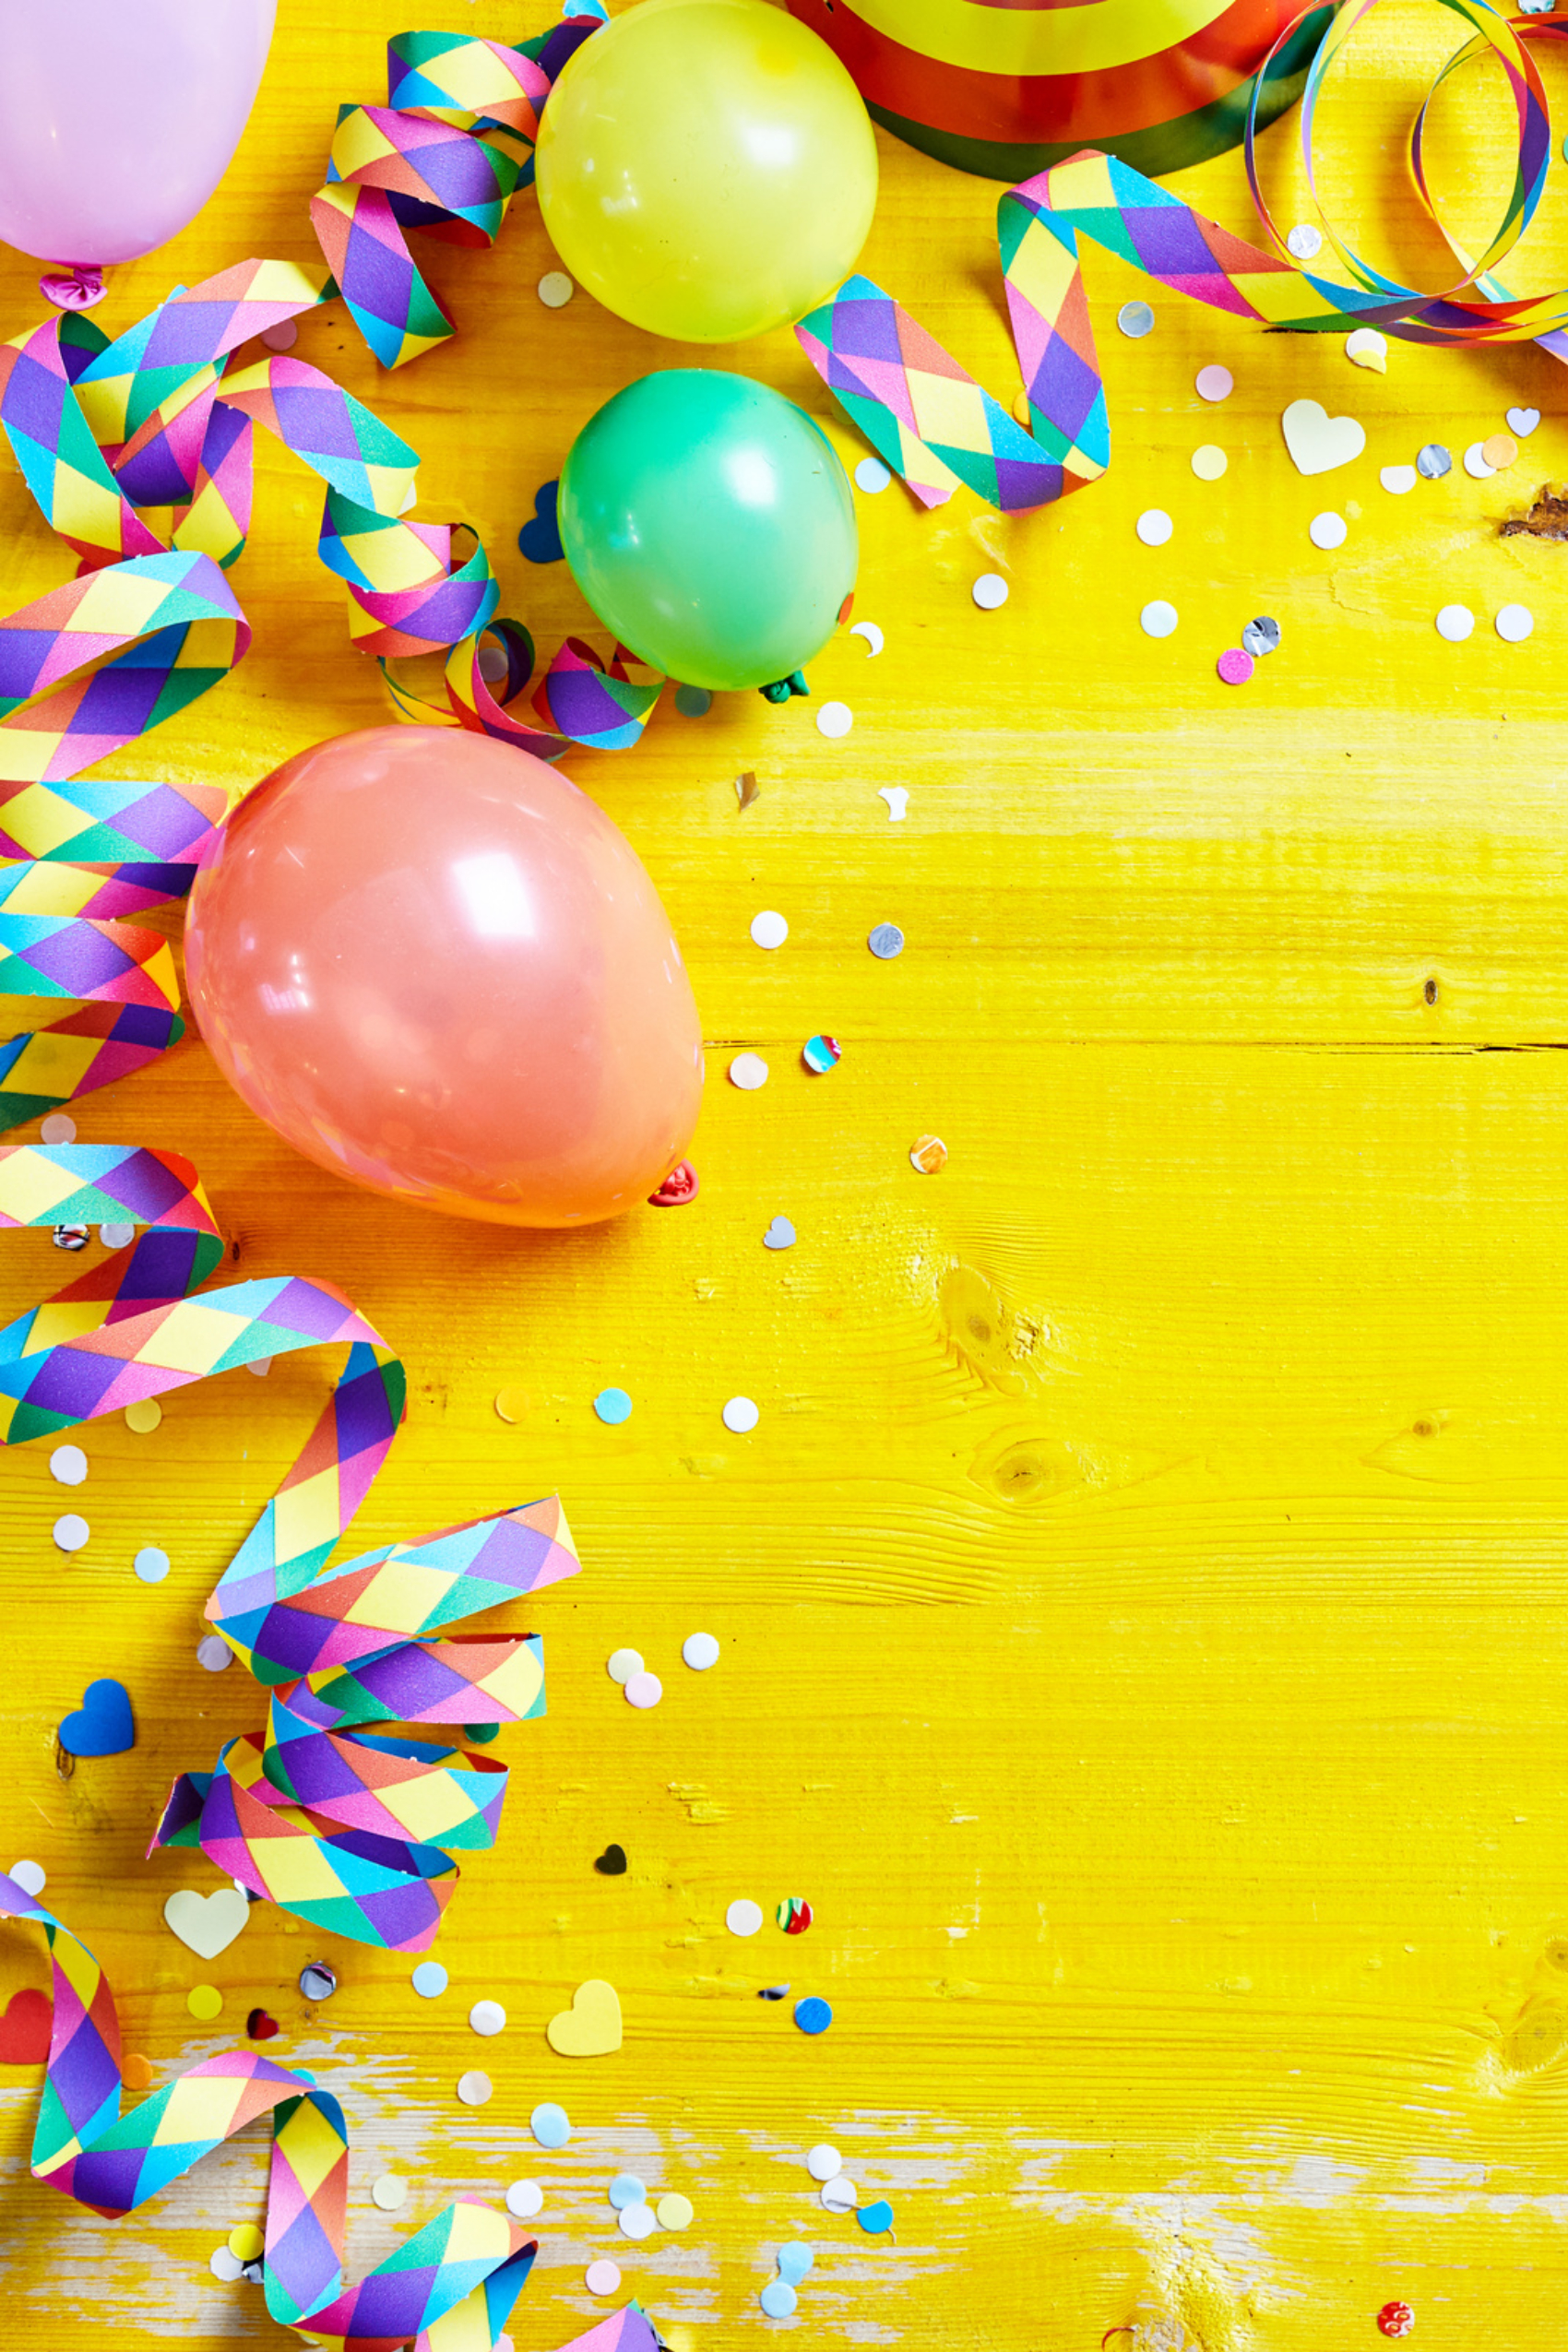 Multi-colored balloons and curled streamers sit atop a bright yellow wooden background.